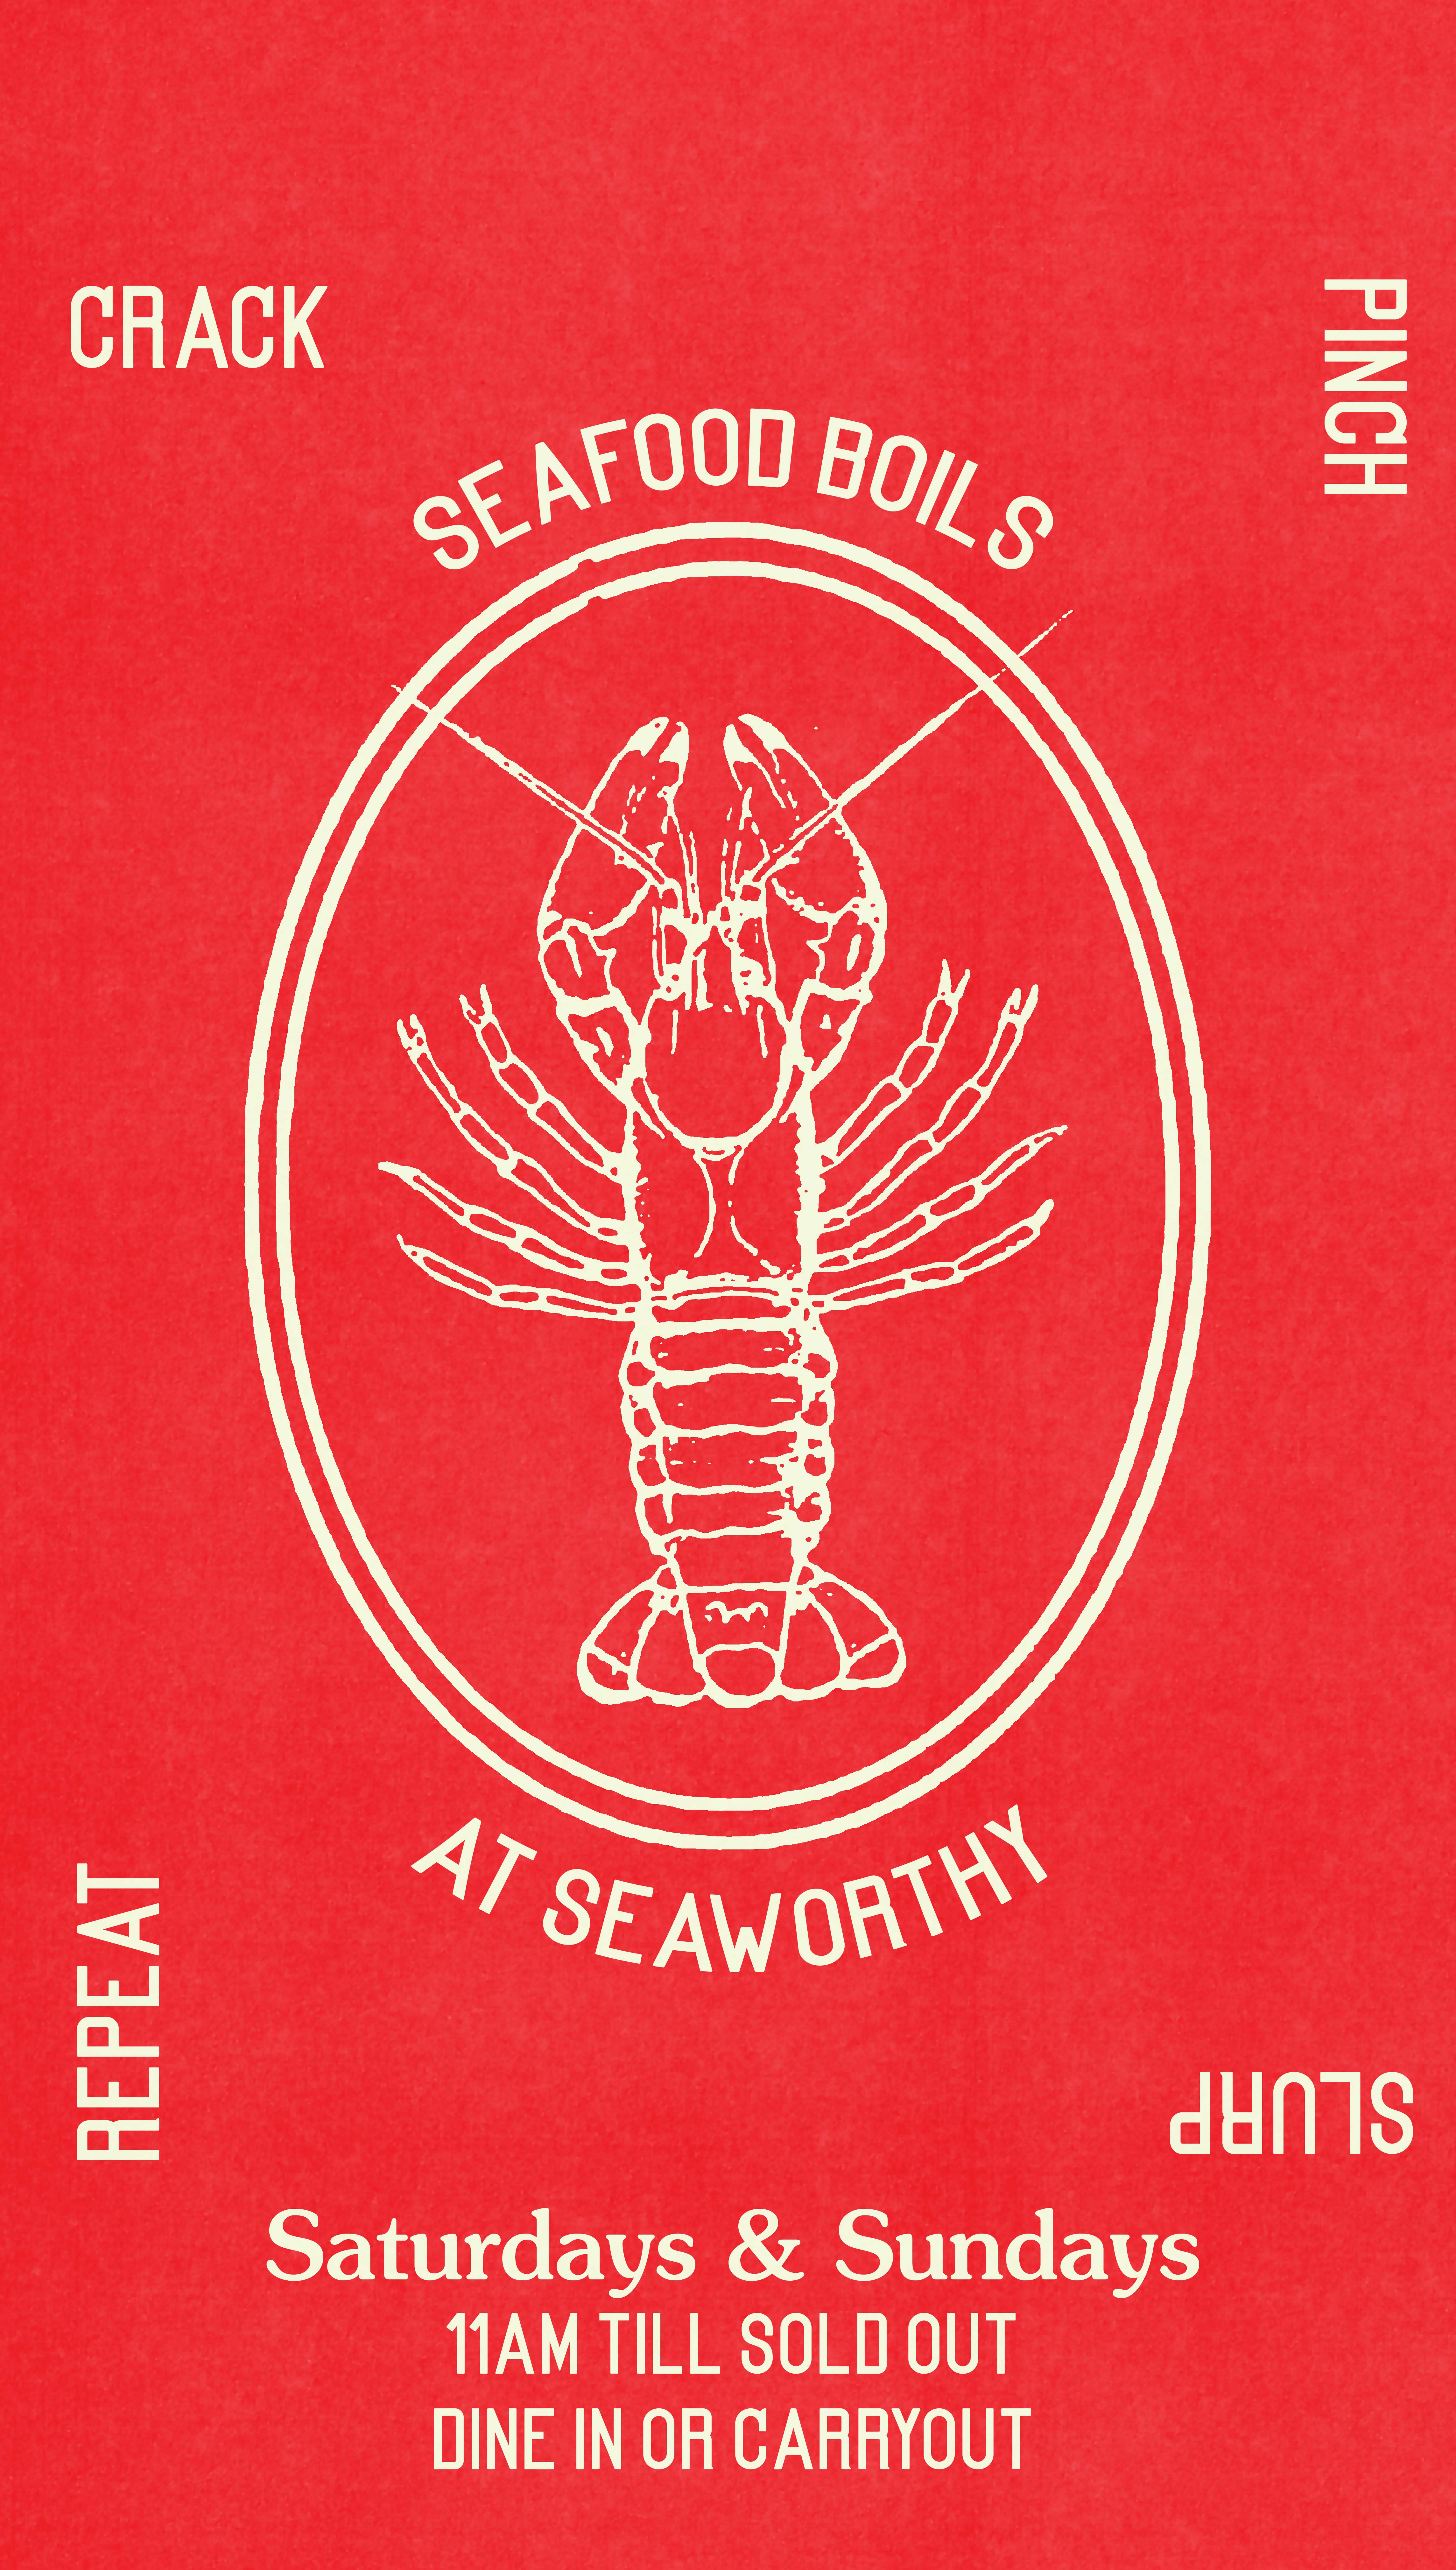 Seafood boils at Seaworthy promo graphic